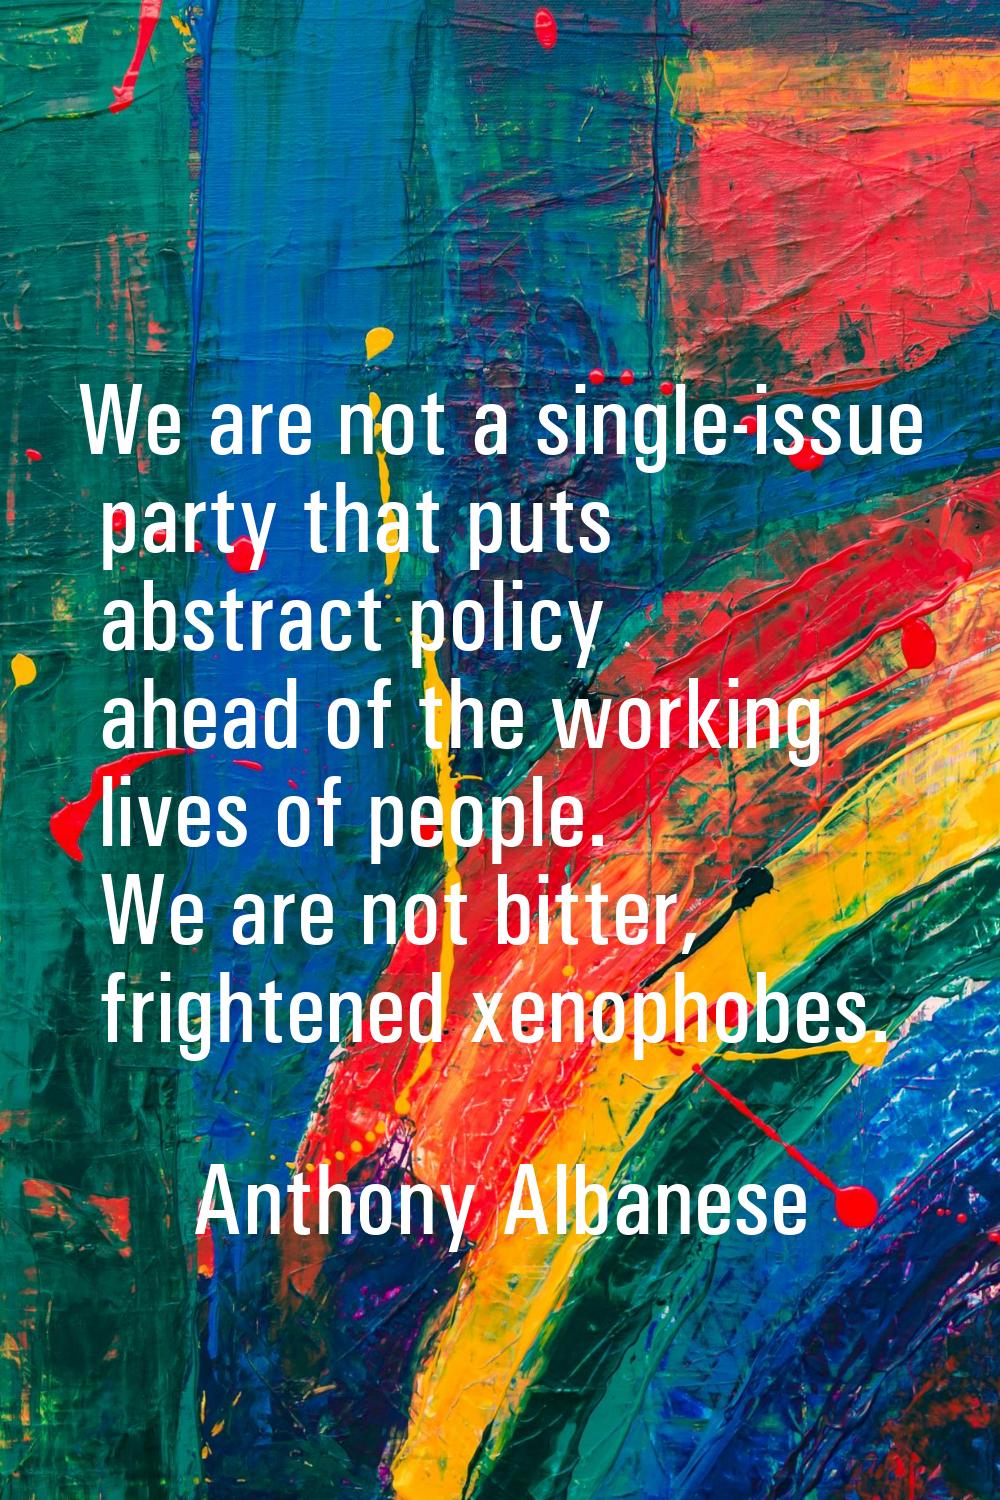 We are not a single-issue party that puts abstract policy ahead of the working lives of people. We 